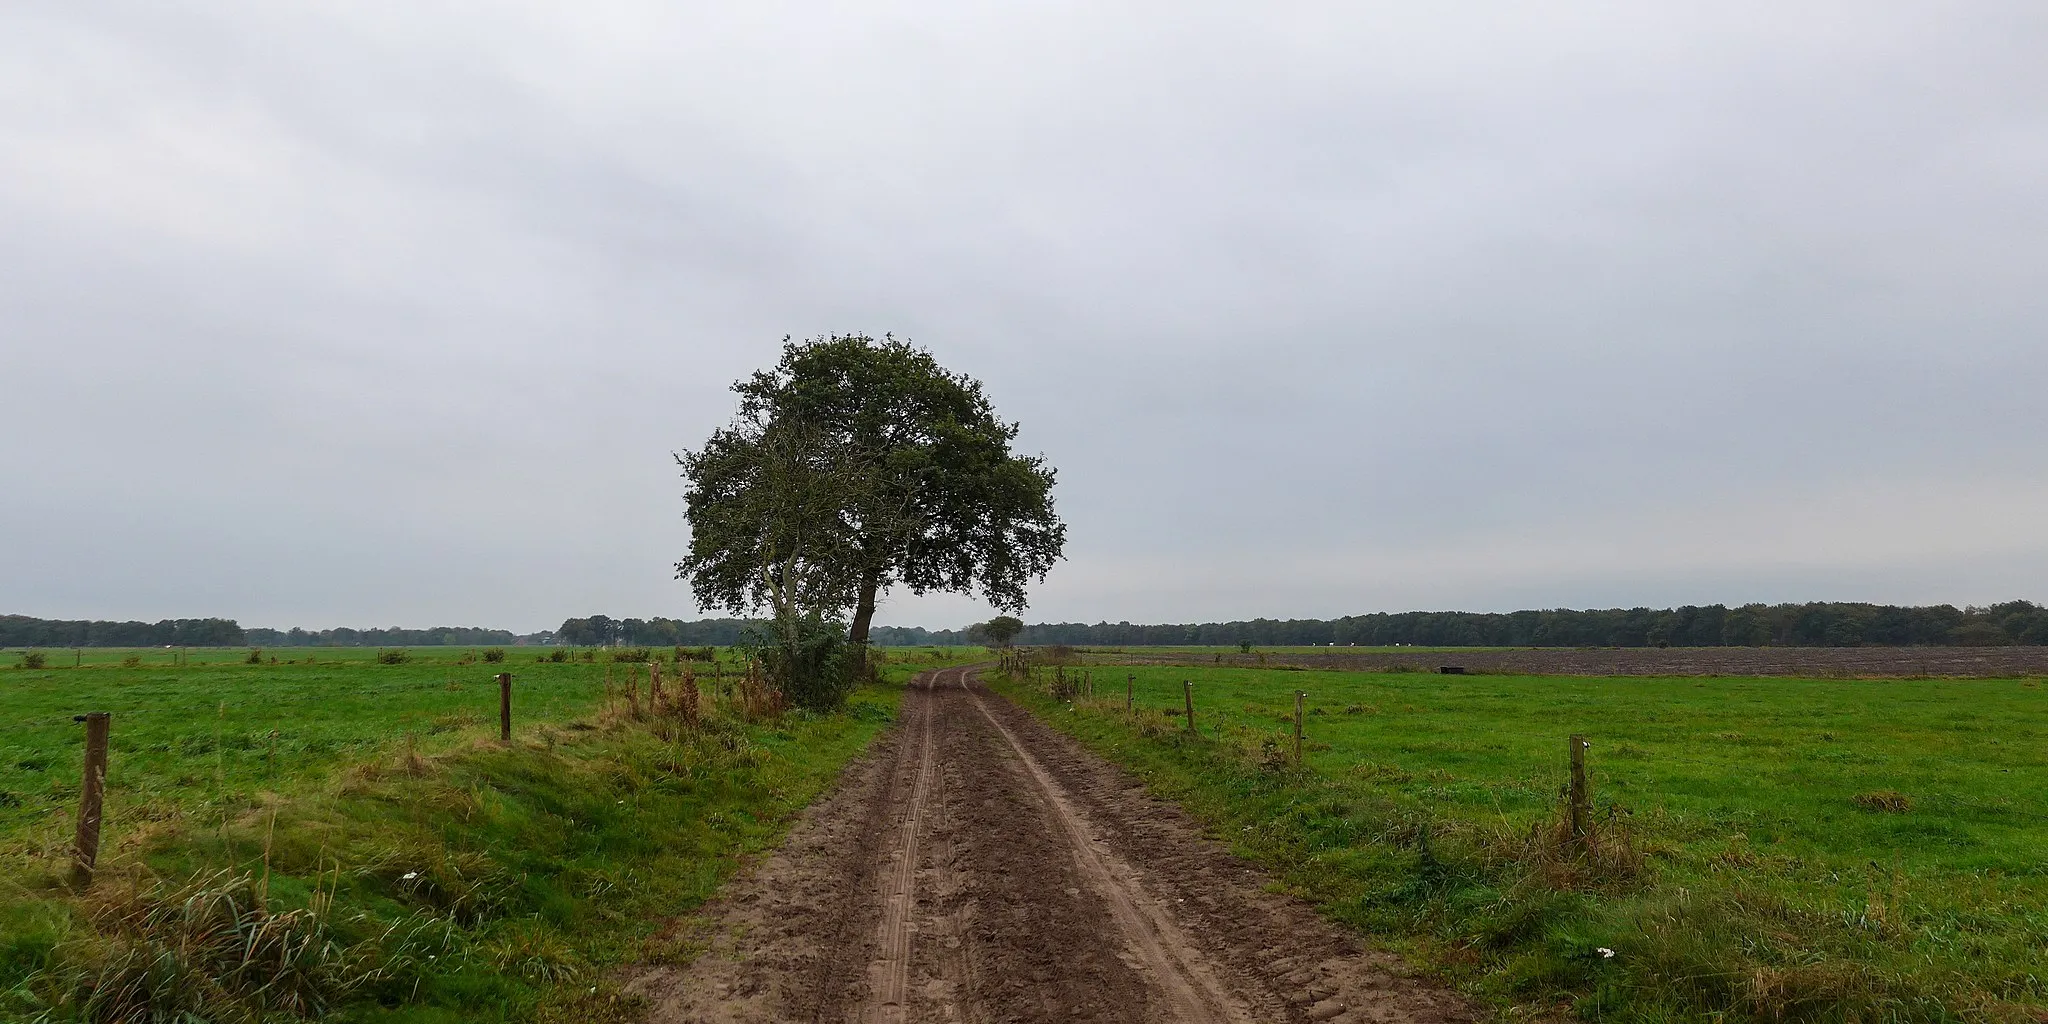 Photo showing: The Kerkweg, an old mass path in the Dutch province of Drenthe.